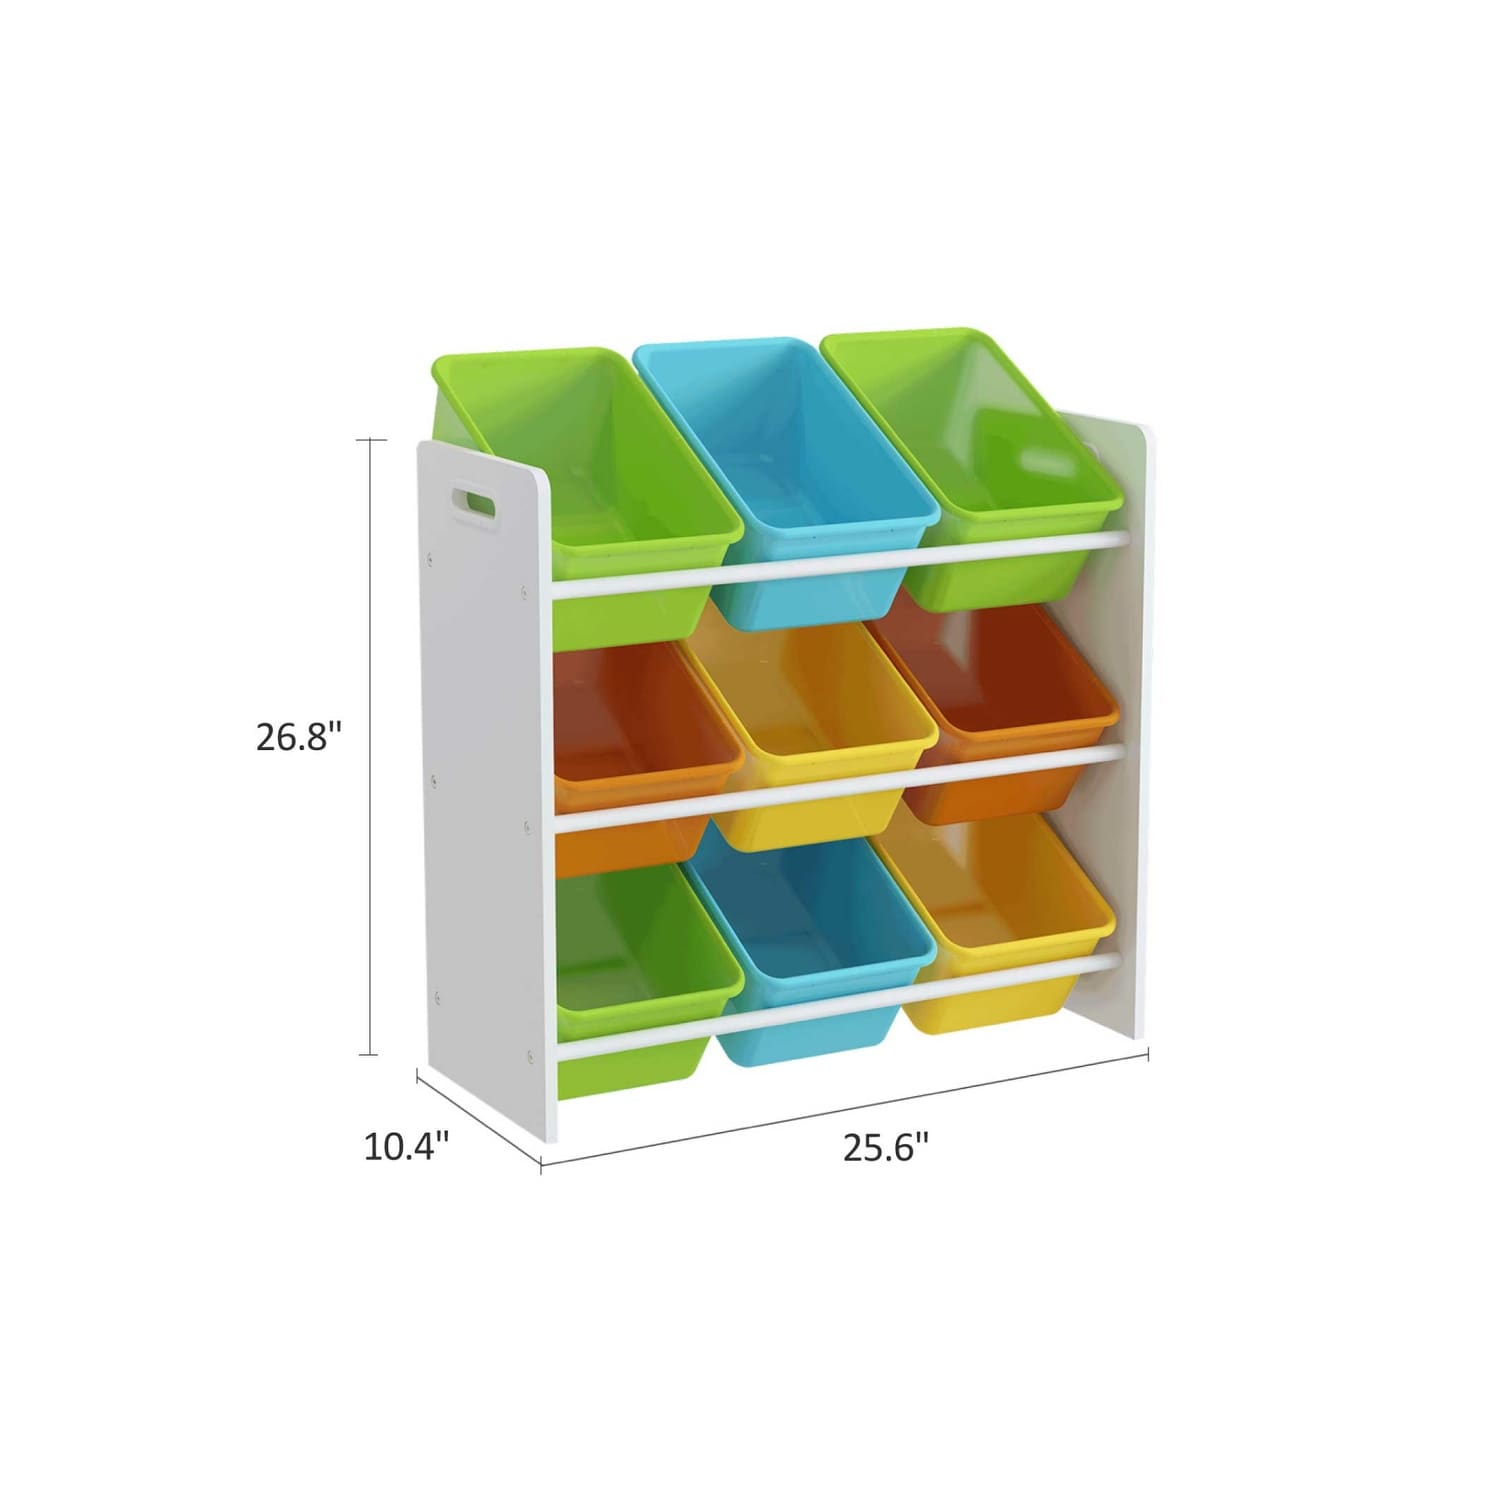 https://ak1.ostkcdn.com/images/products/is/images/direct/af5ad53e885baf3a40fdeb1fc4e29b3fcf2afdf2/Year-Color-Toy-Cube-Storage-Organizer-with-9-Colorful-Storage-Bins.jpg